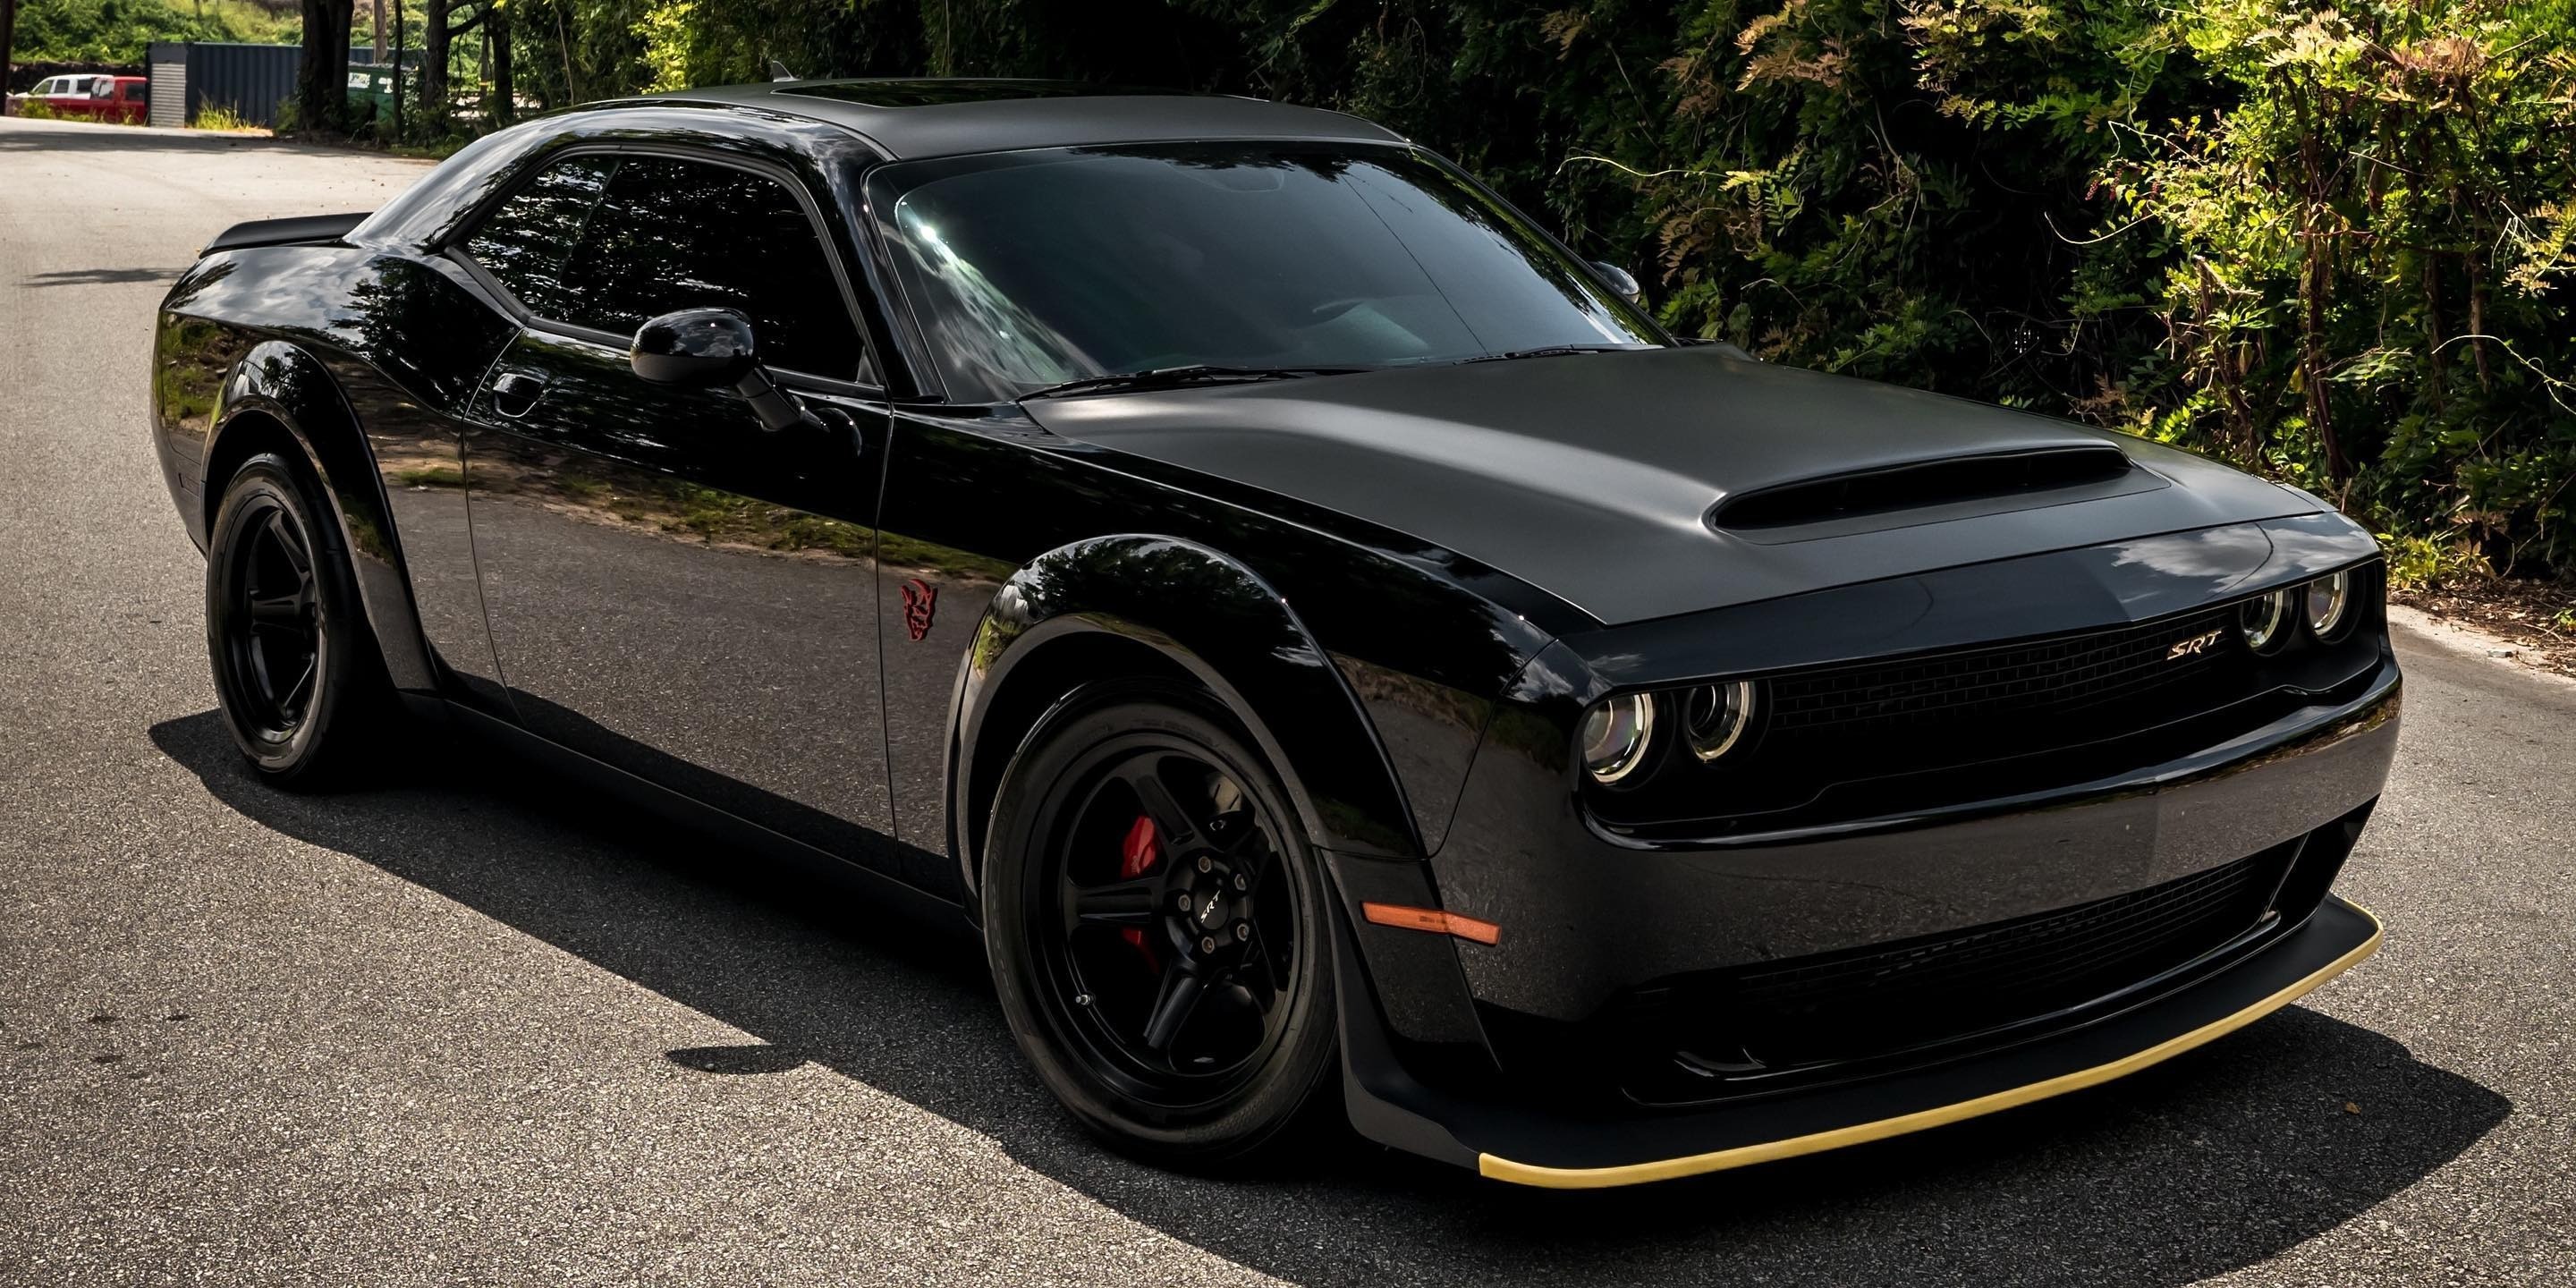 https://s1.cdn.autoevolution.com/images/news/gallery/custom-840-hp-dodge-challenger-rs-is-a-two-tone-gloss-satin-murdered-out-demon_13.jpg